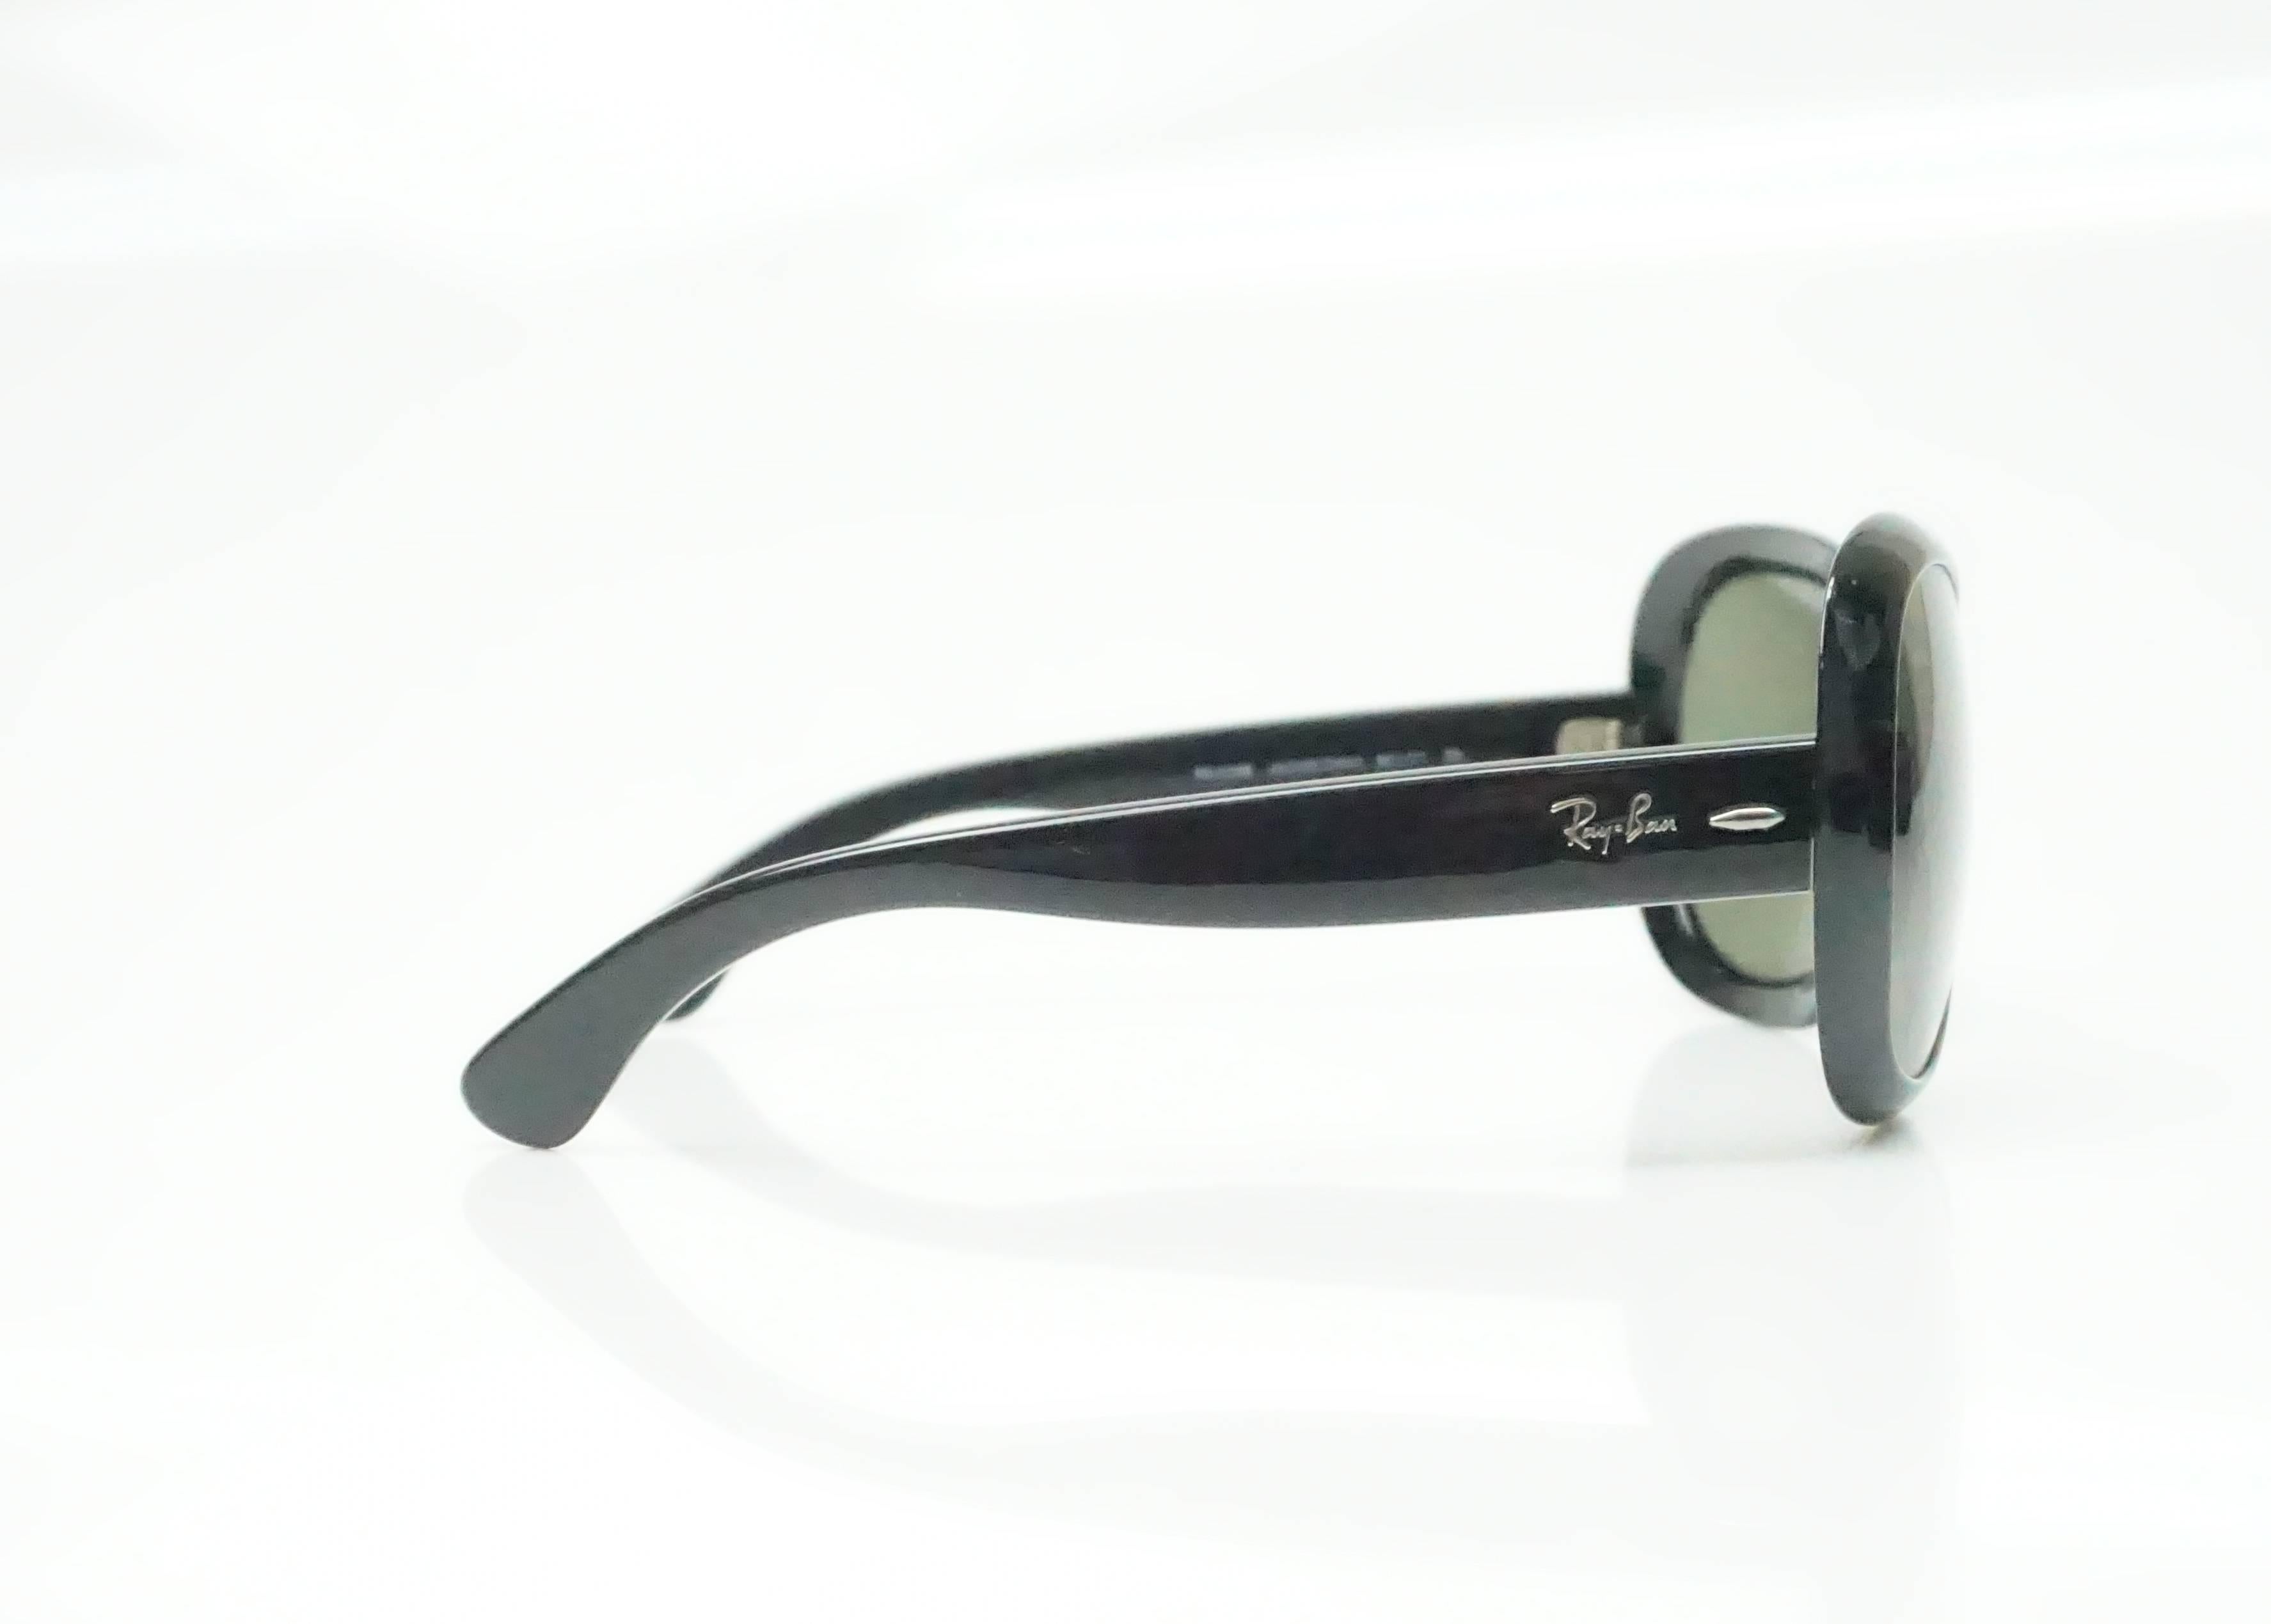 Ray-Ban Black Jackie Ohh II Sunglasses   These sunglasses are in excellent condition. They are all black with silver logo on the legs. The lens are dark and rounded.
Measurements
Front: 6